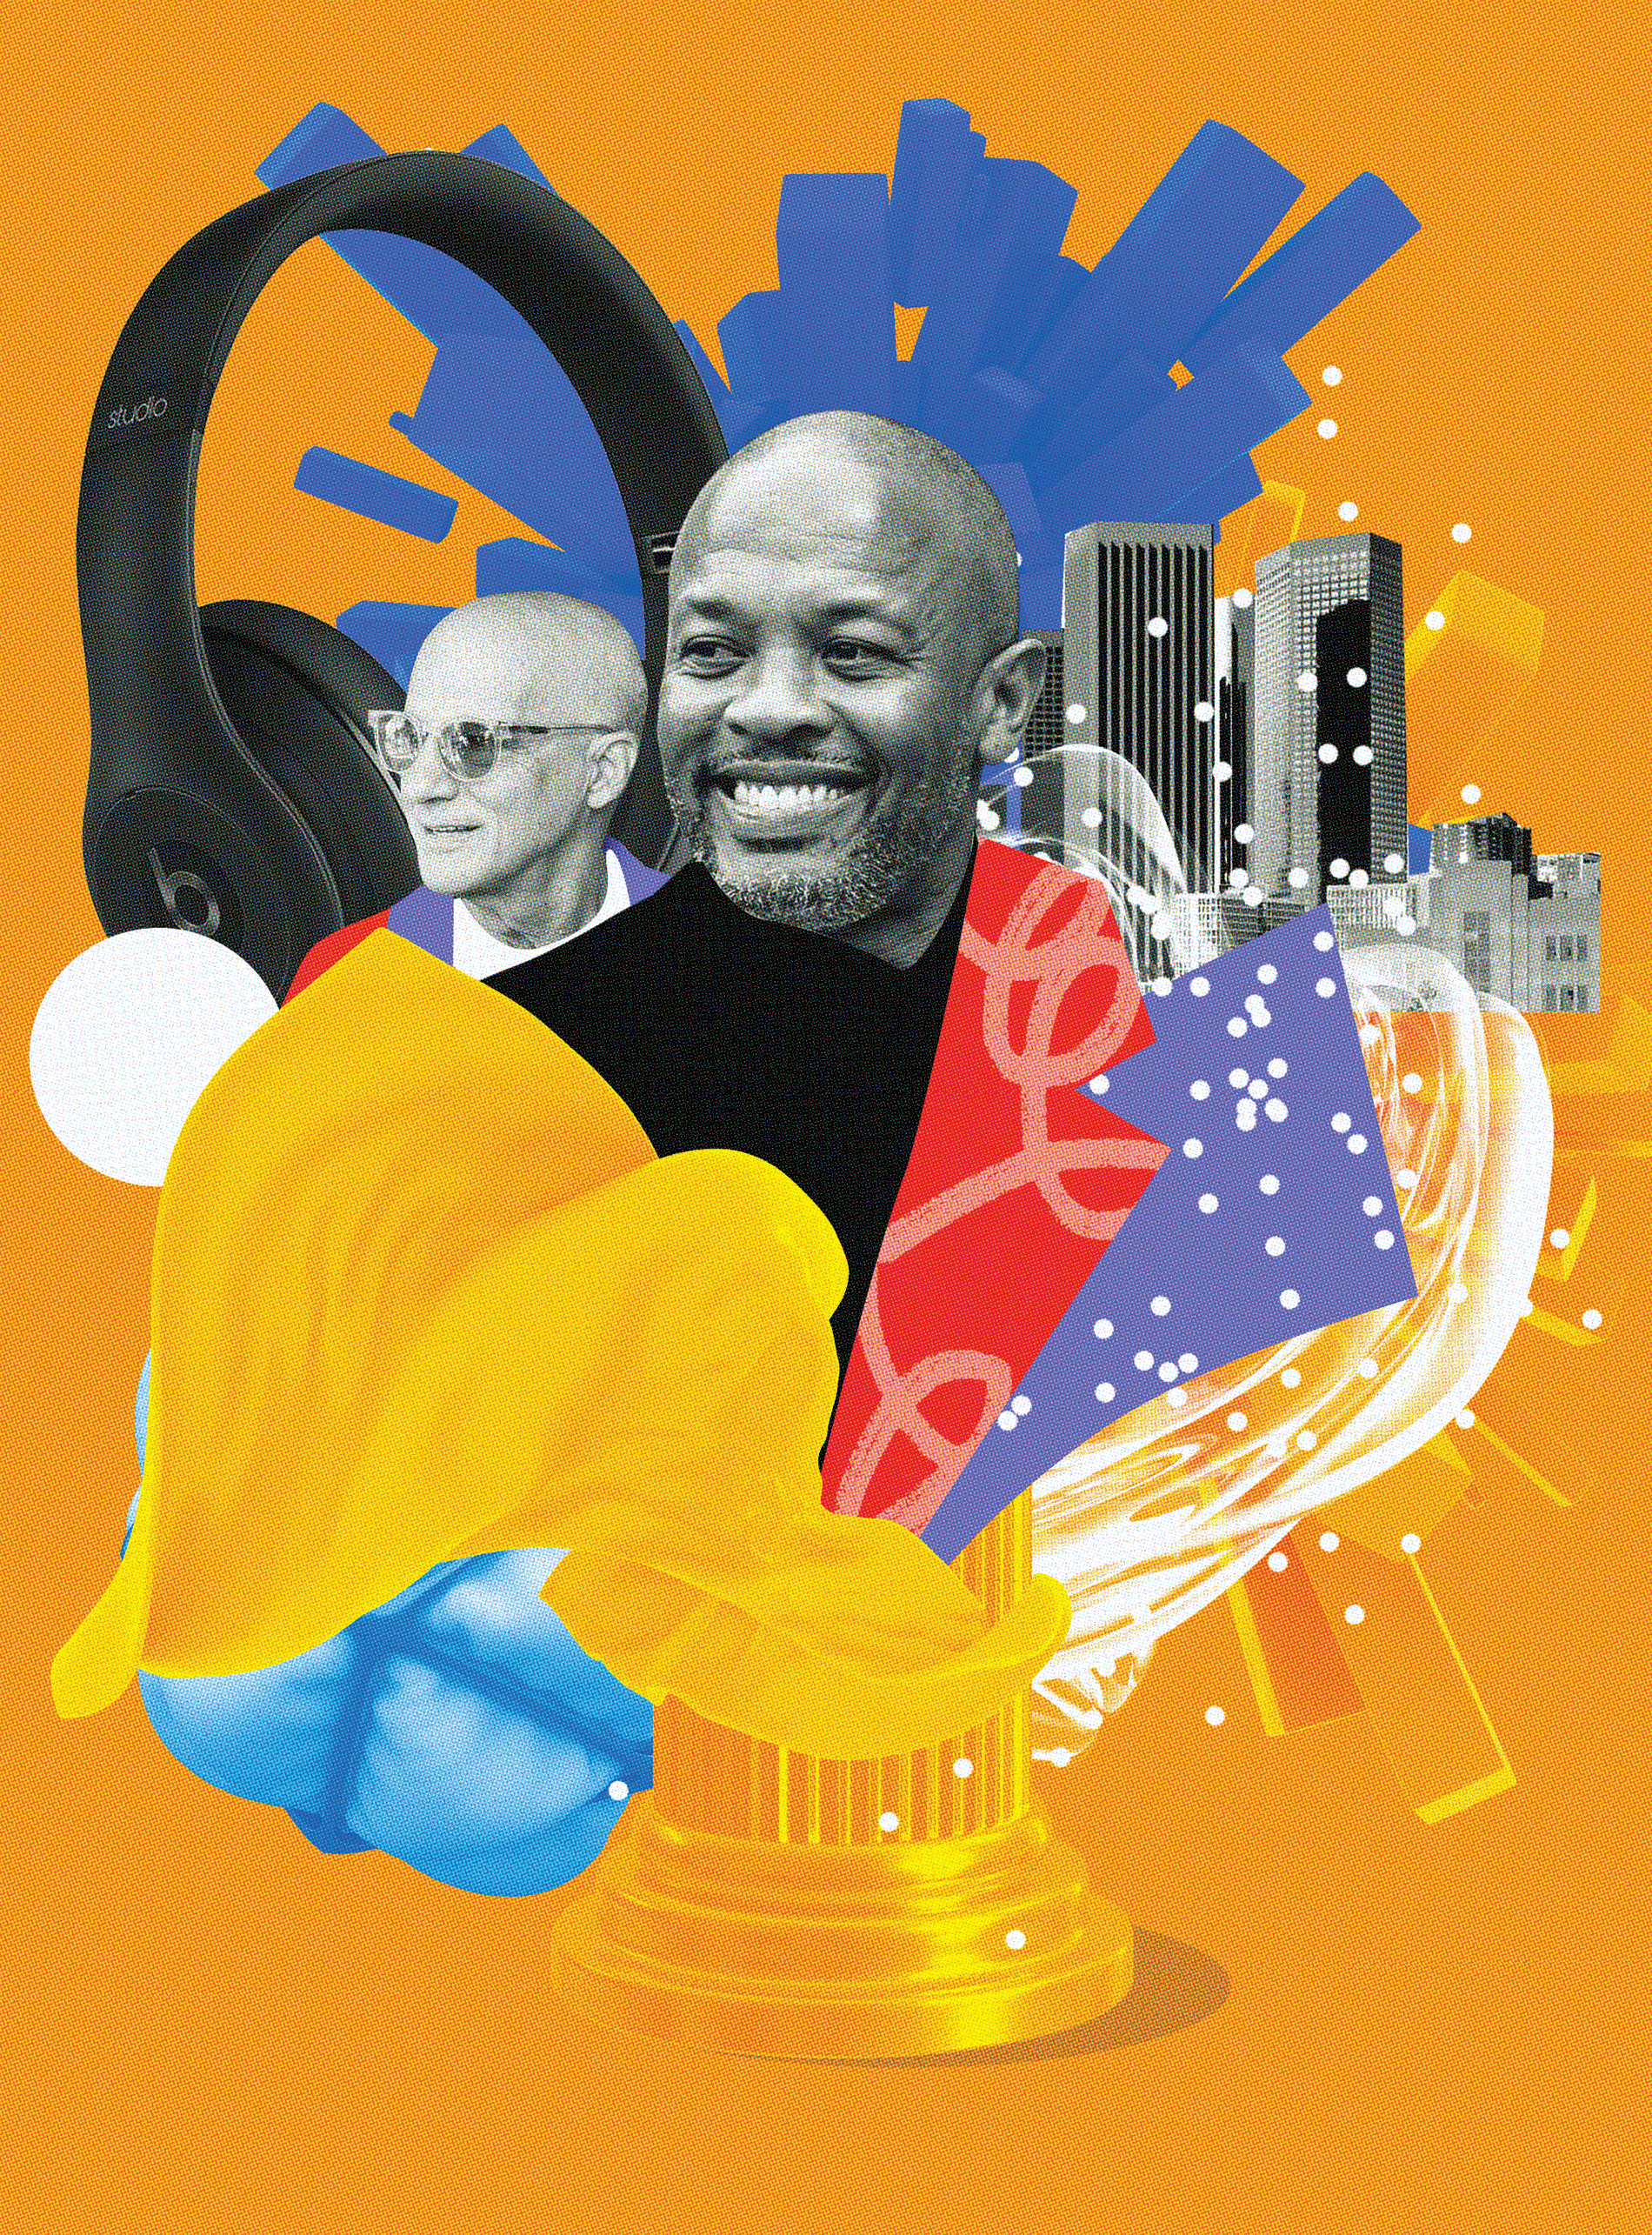 Illustration of Jimmy Iovine and Andre Young with DTLA and headphones in the backdrop over an orange background with pops of color.